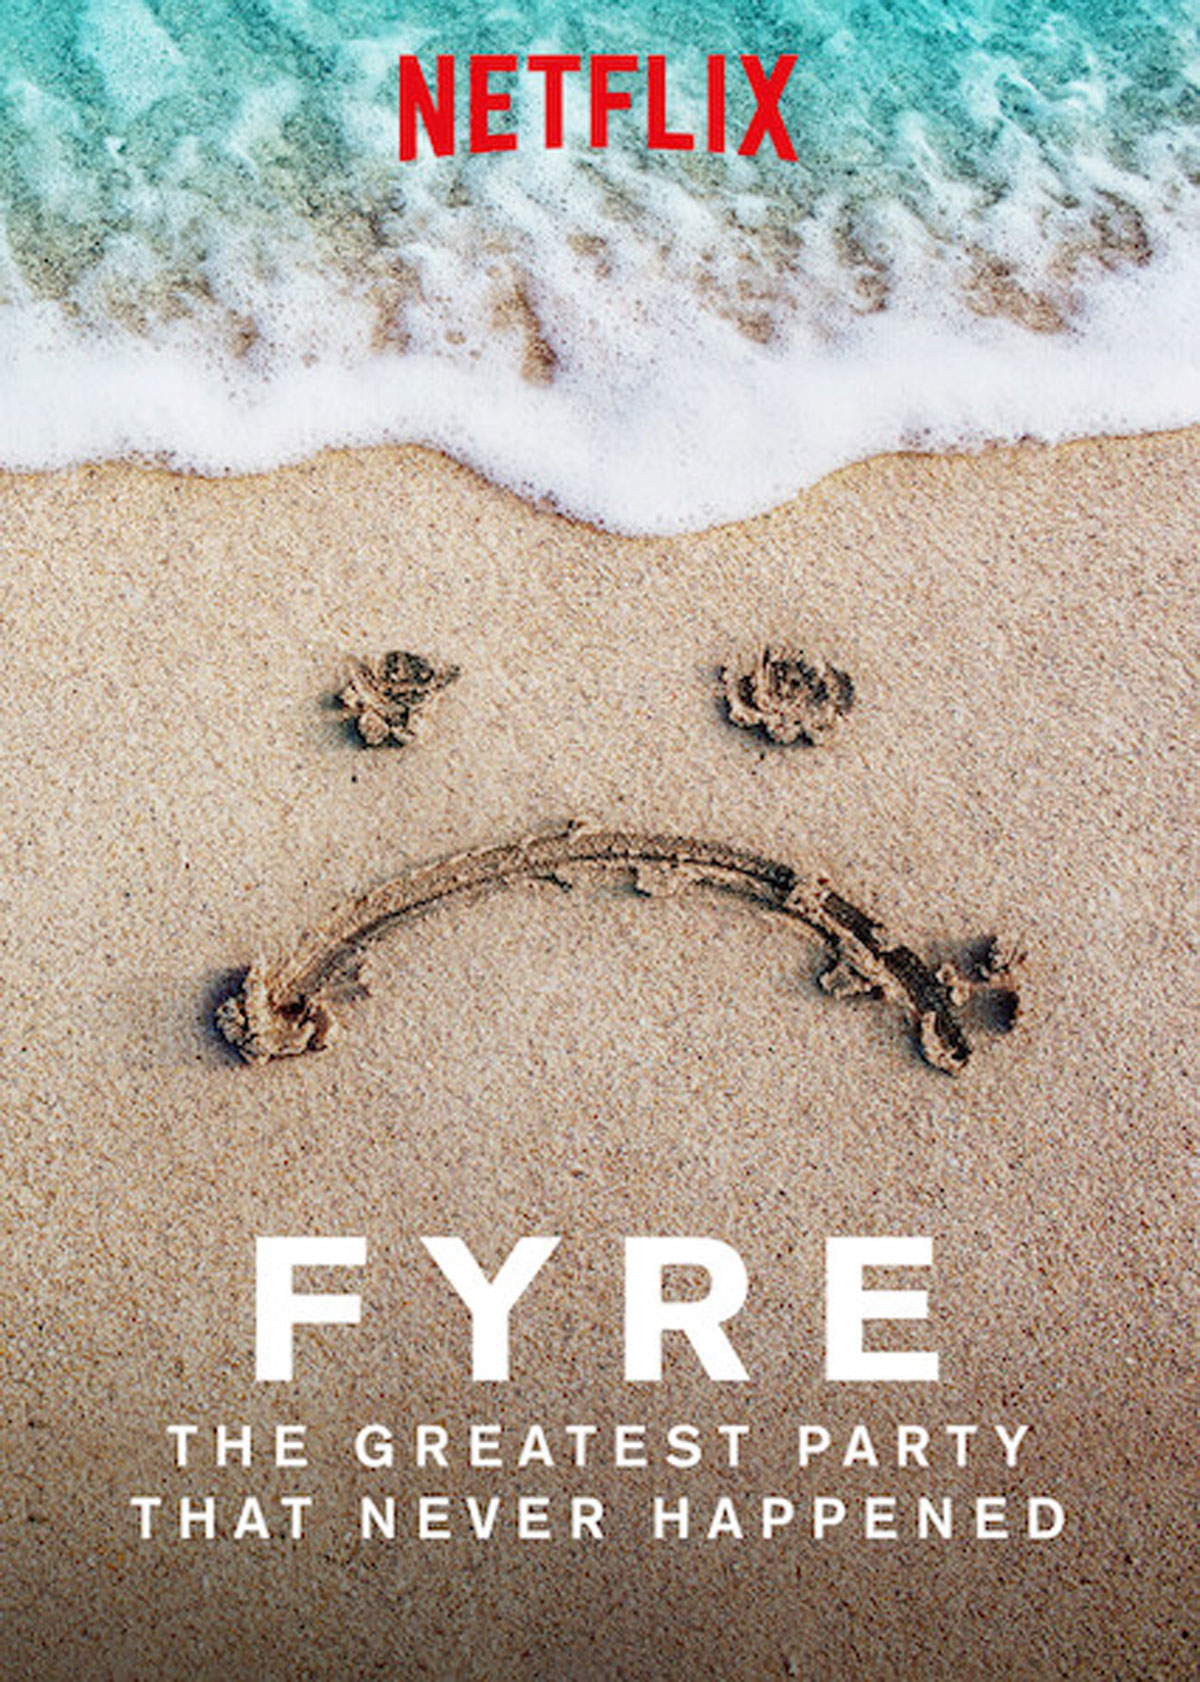 FYRE- The Greatest Party That Never Happened - marketing documentaries